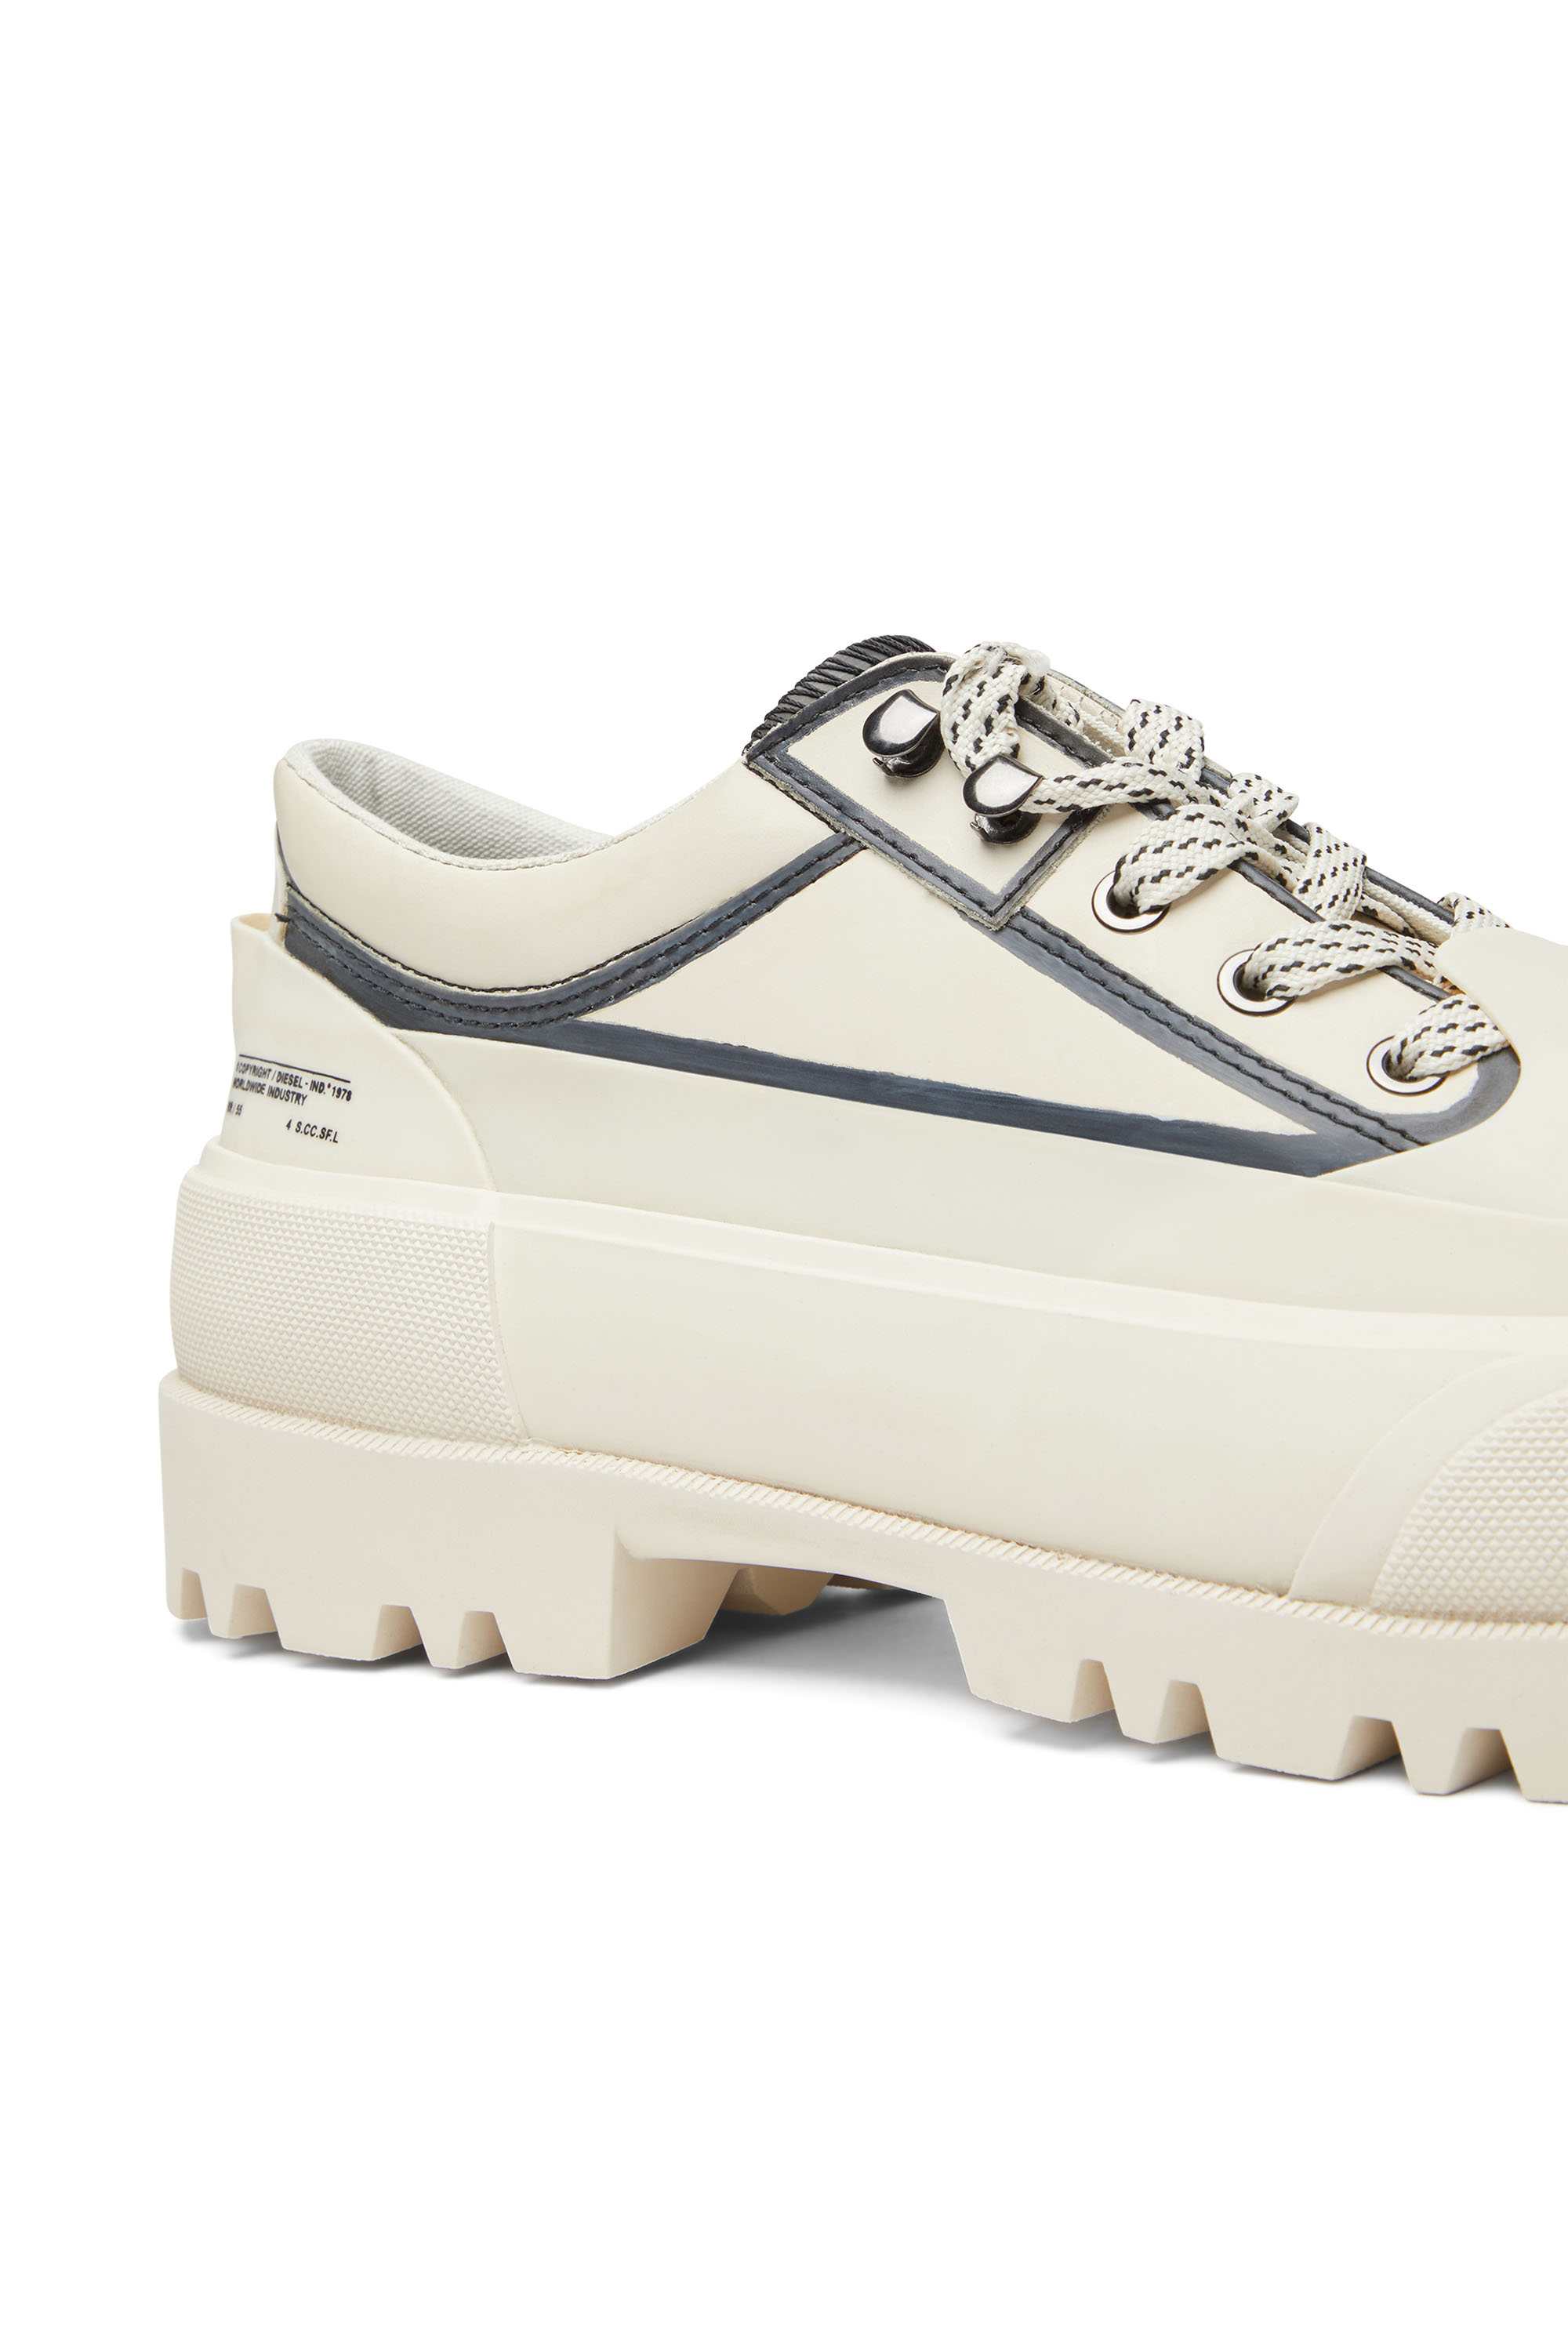 Diesel - D-HIKO SH X, Man D-Hiko SH X - Combat shoe in leather and rubber in Multicolor - Image 6